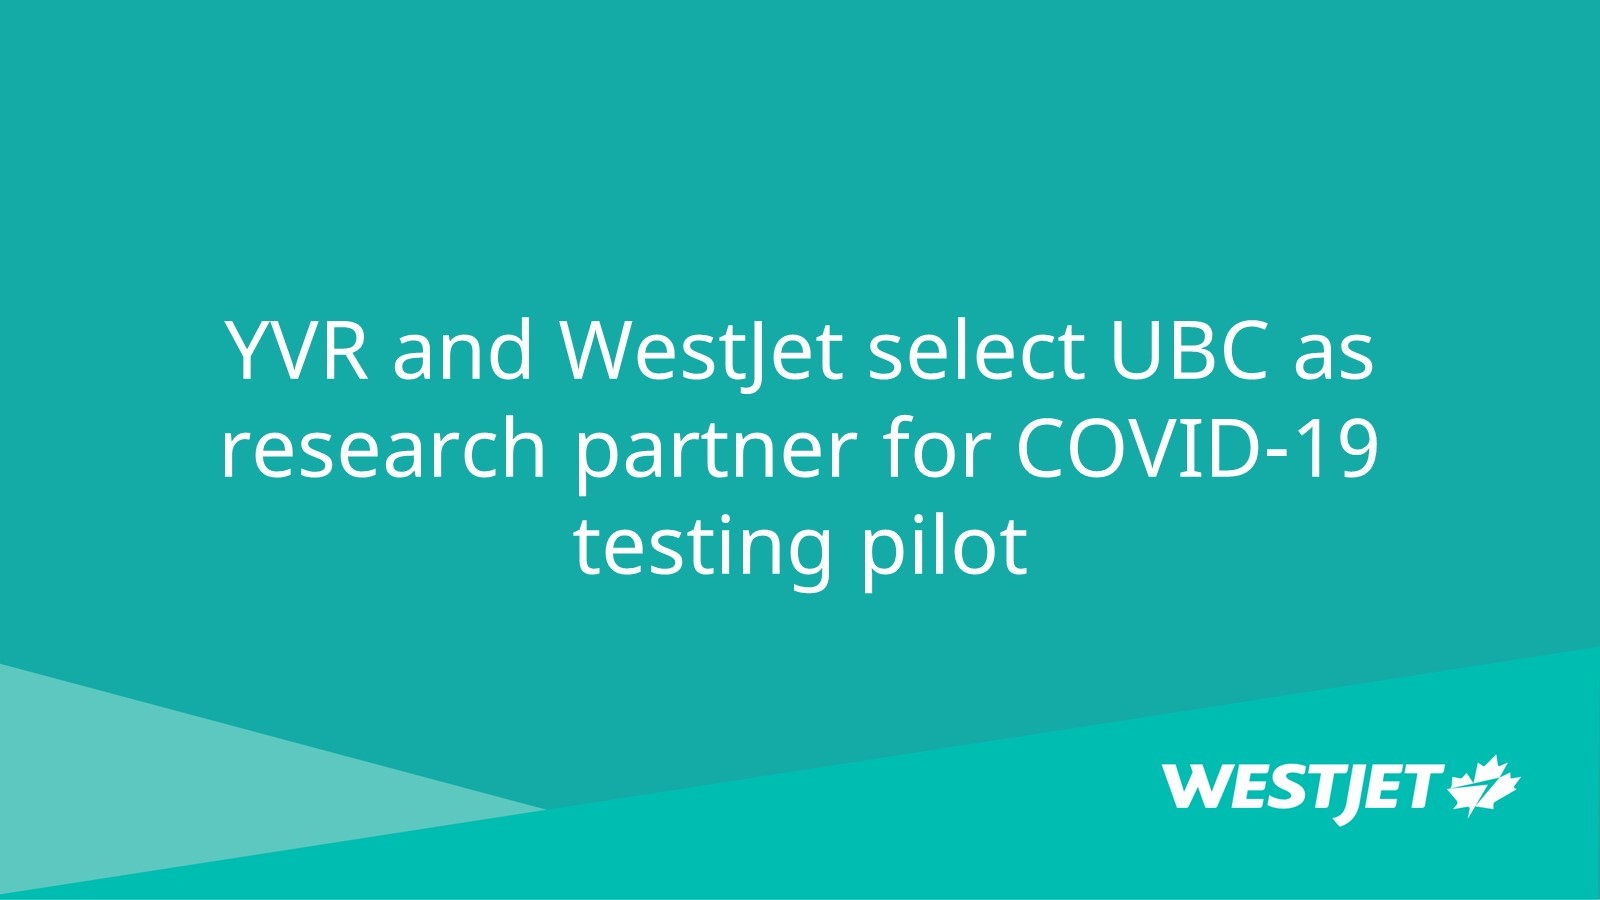 YVR and WestJet select UBC as research partner for COVID-19 testing pilot